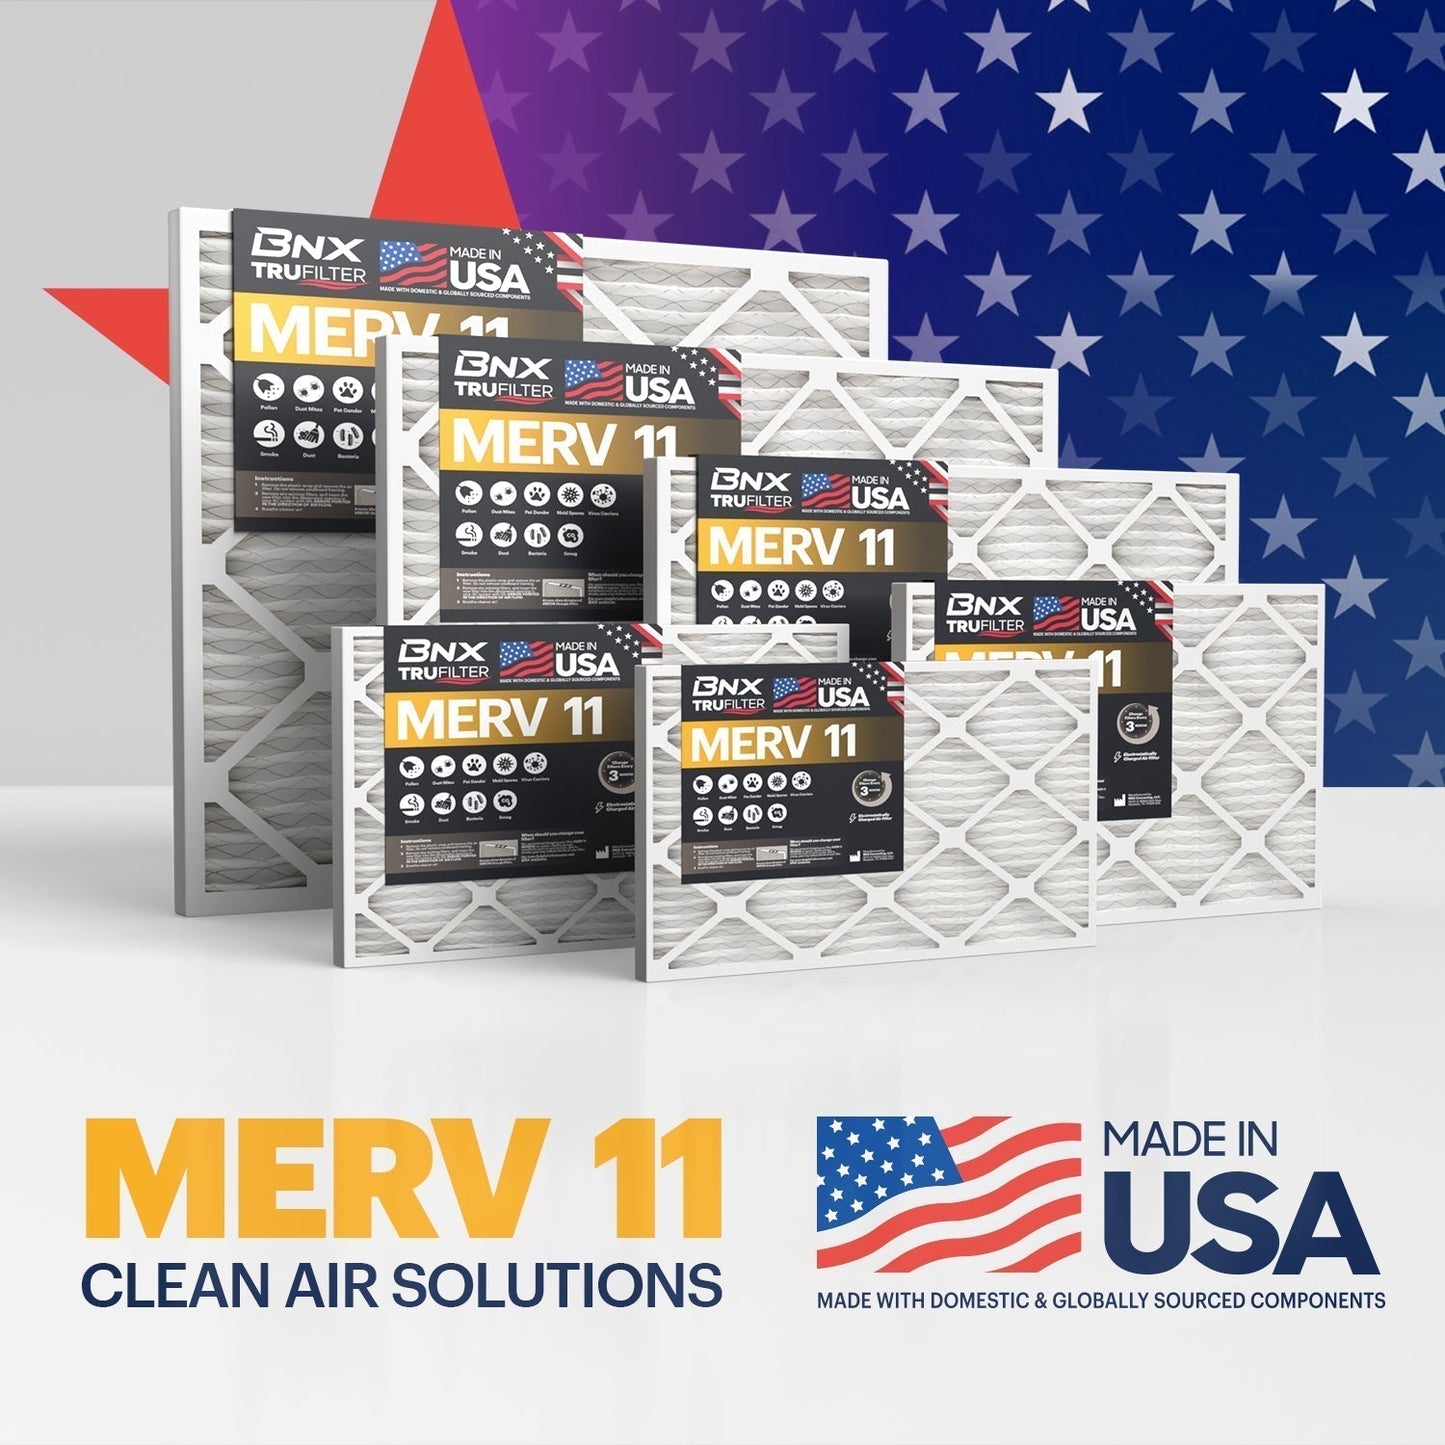 BNX TruFilter 14x14x1 MERV 11 Air Filter 6 Pack - MADE IN USA - Electrostatic Pleated Air Conditioner HVAC AC Furnace Filters - Removes Dust, Mold, Pollen, Lint, Pet Dander, Smoke, Smog